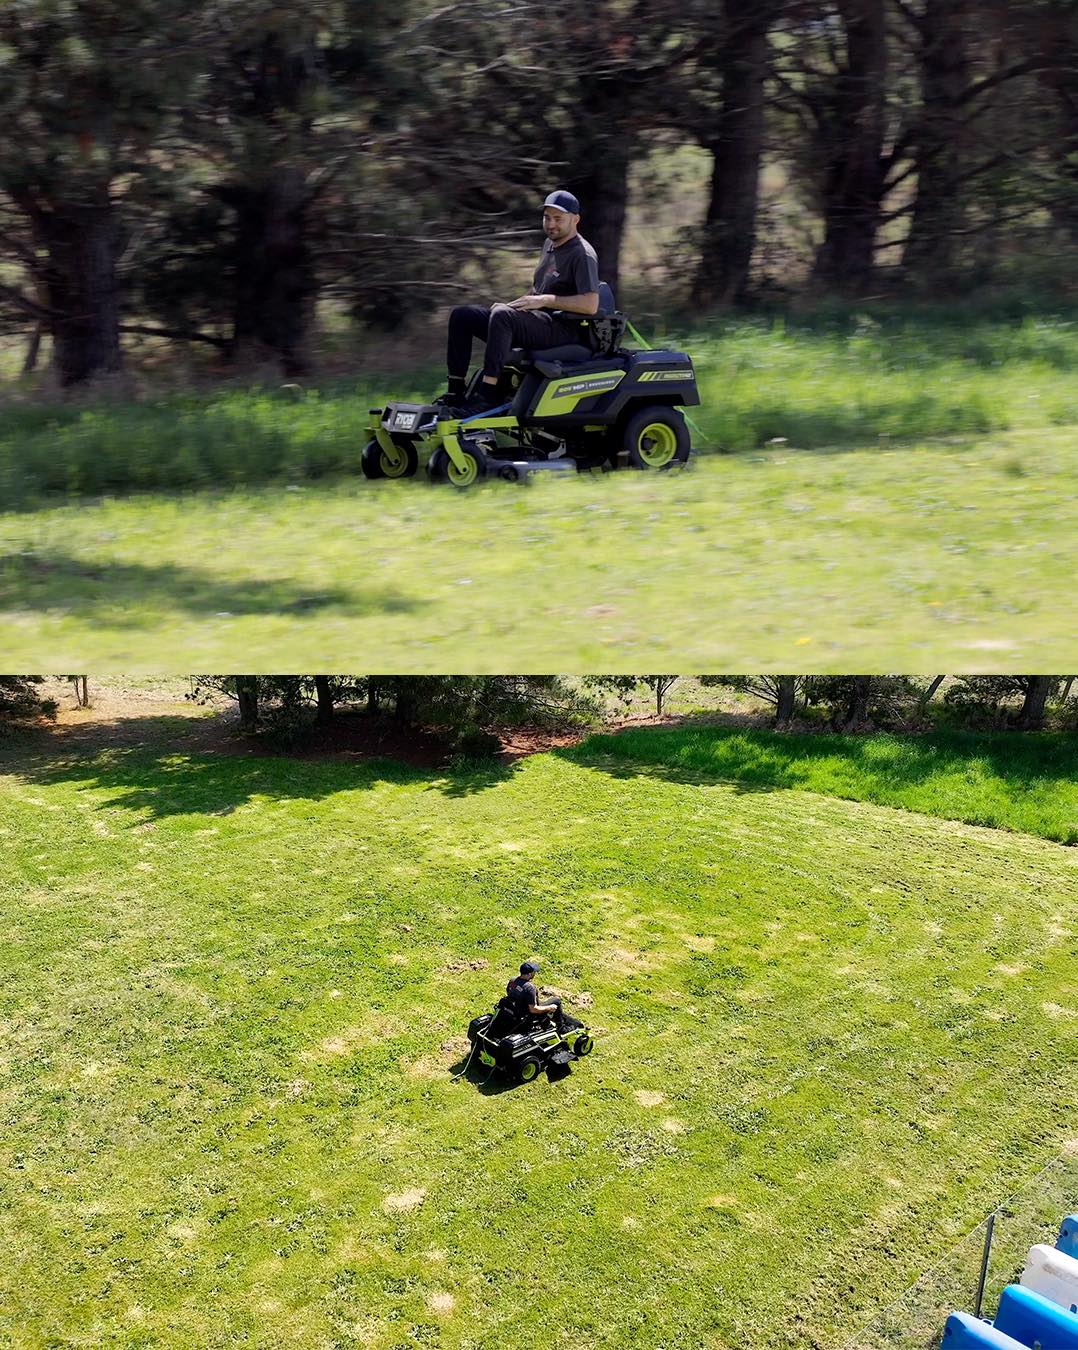 Presentation is key! 
Time to test out the ryobiau Ride-On Mower to help this track become the best version of itself yet! 

#ryobi #ryobiau #ryobibattery #lawnmower #mower #trimmer #grass #lawncare #mightycarmods